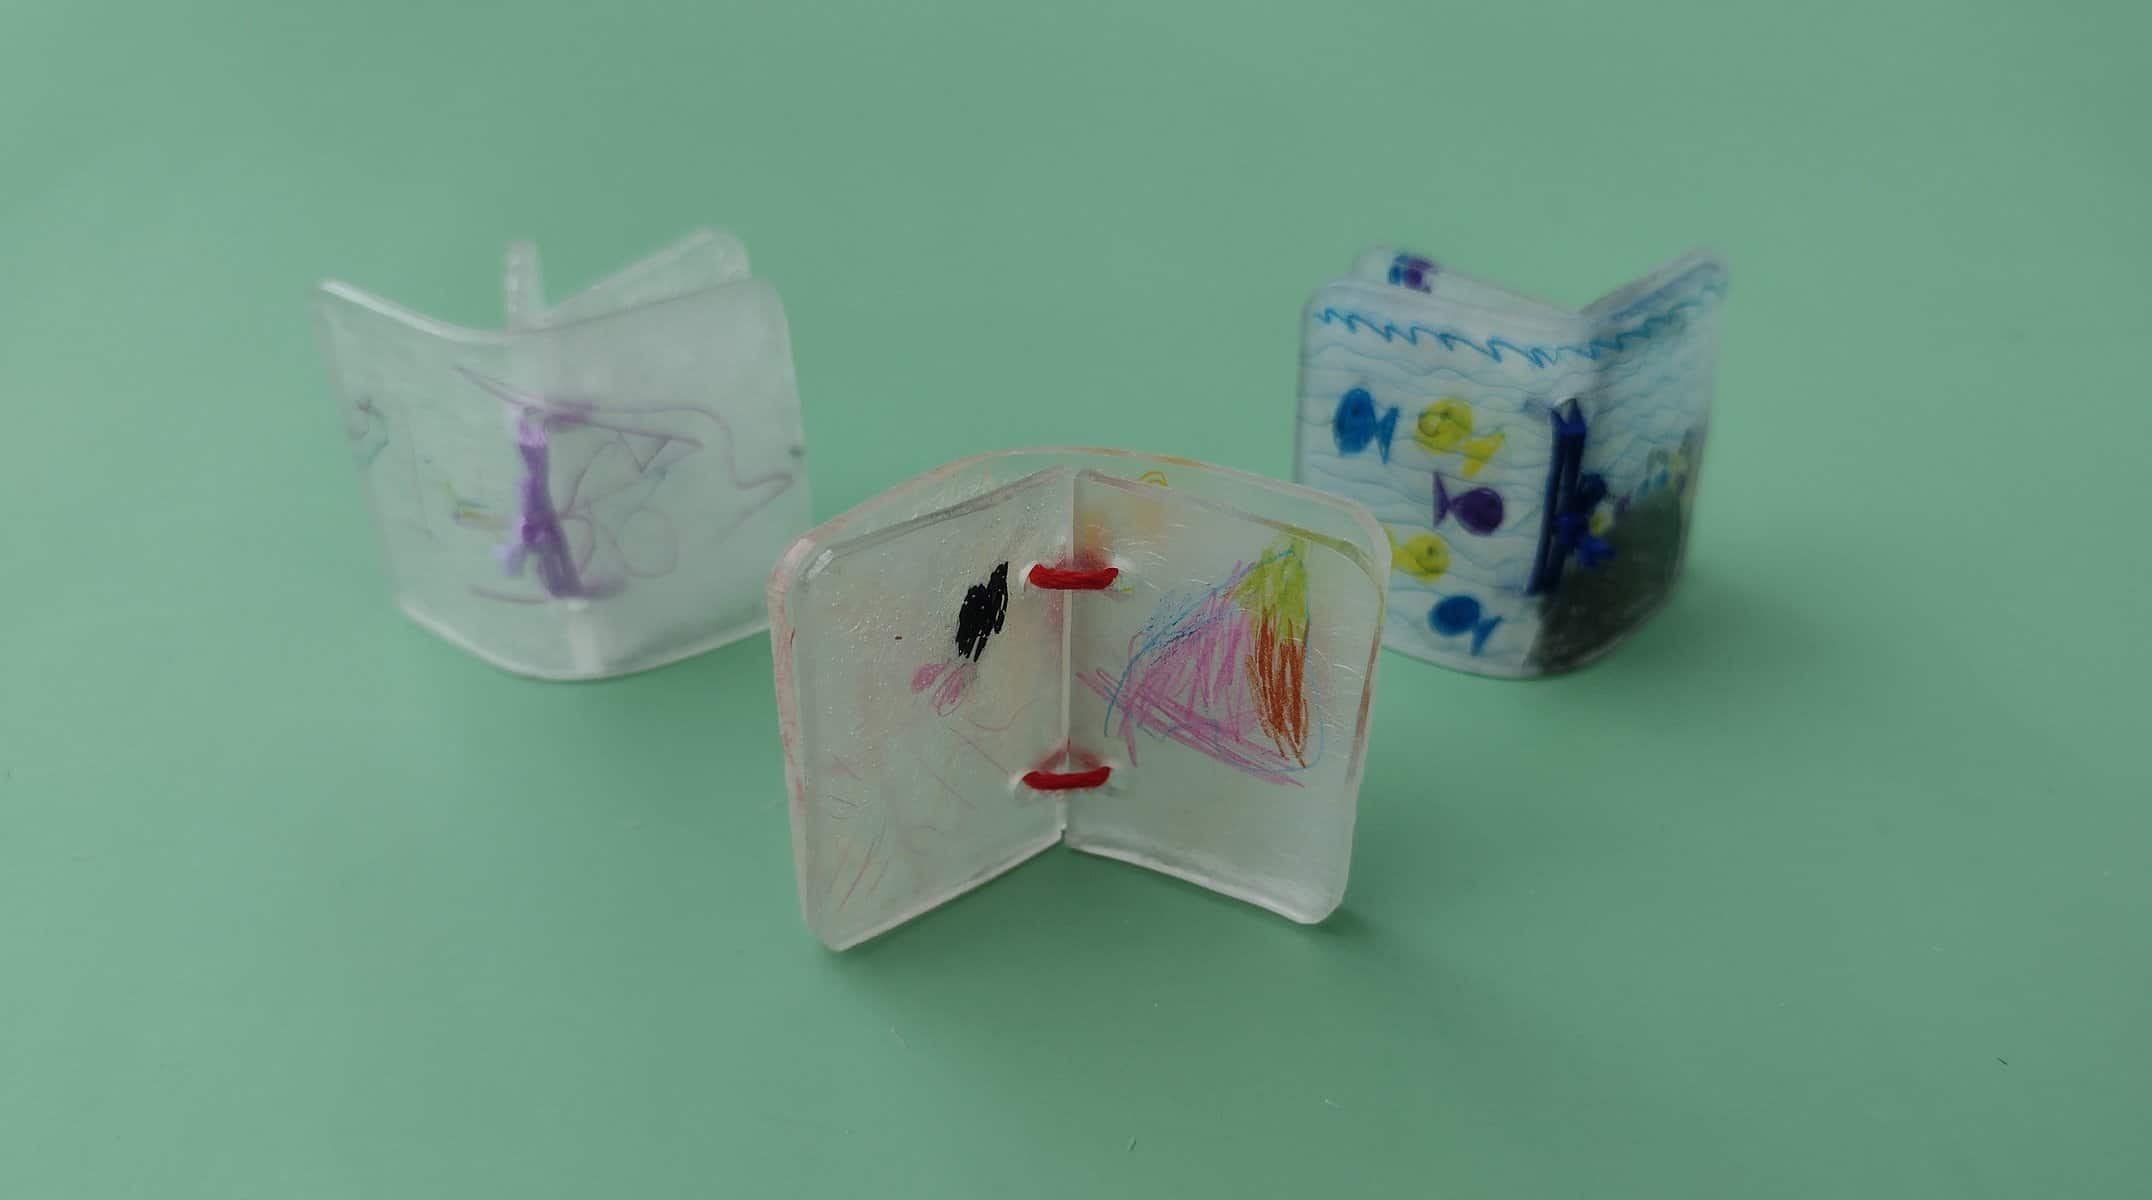 Mini Books – A Shrinky Dink Craft For All Ages